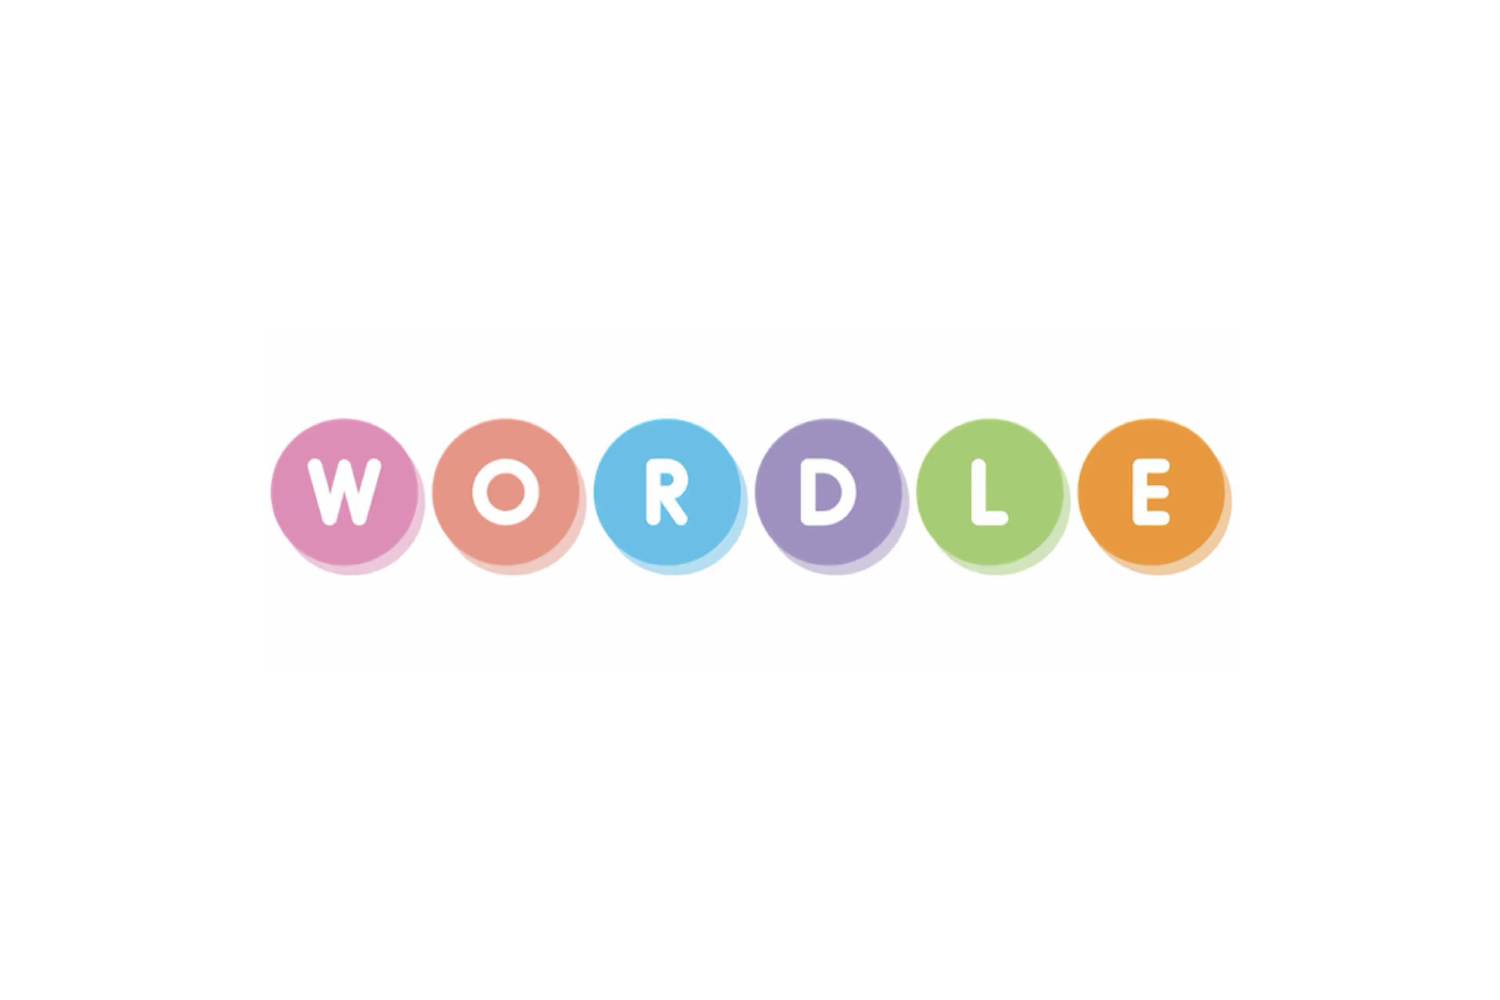 Wordle: The global phenomenon that's not pulling in any revenue